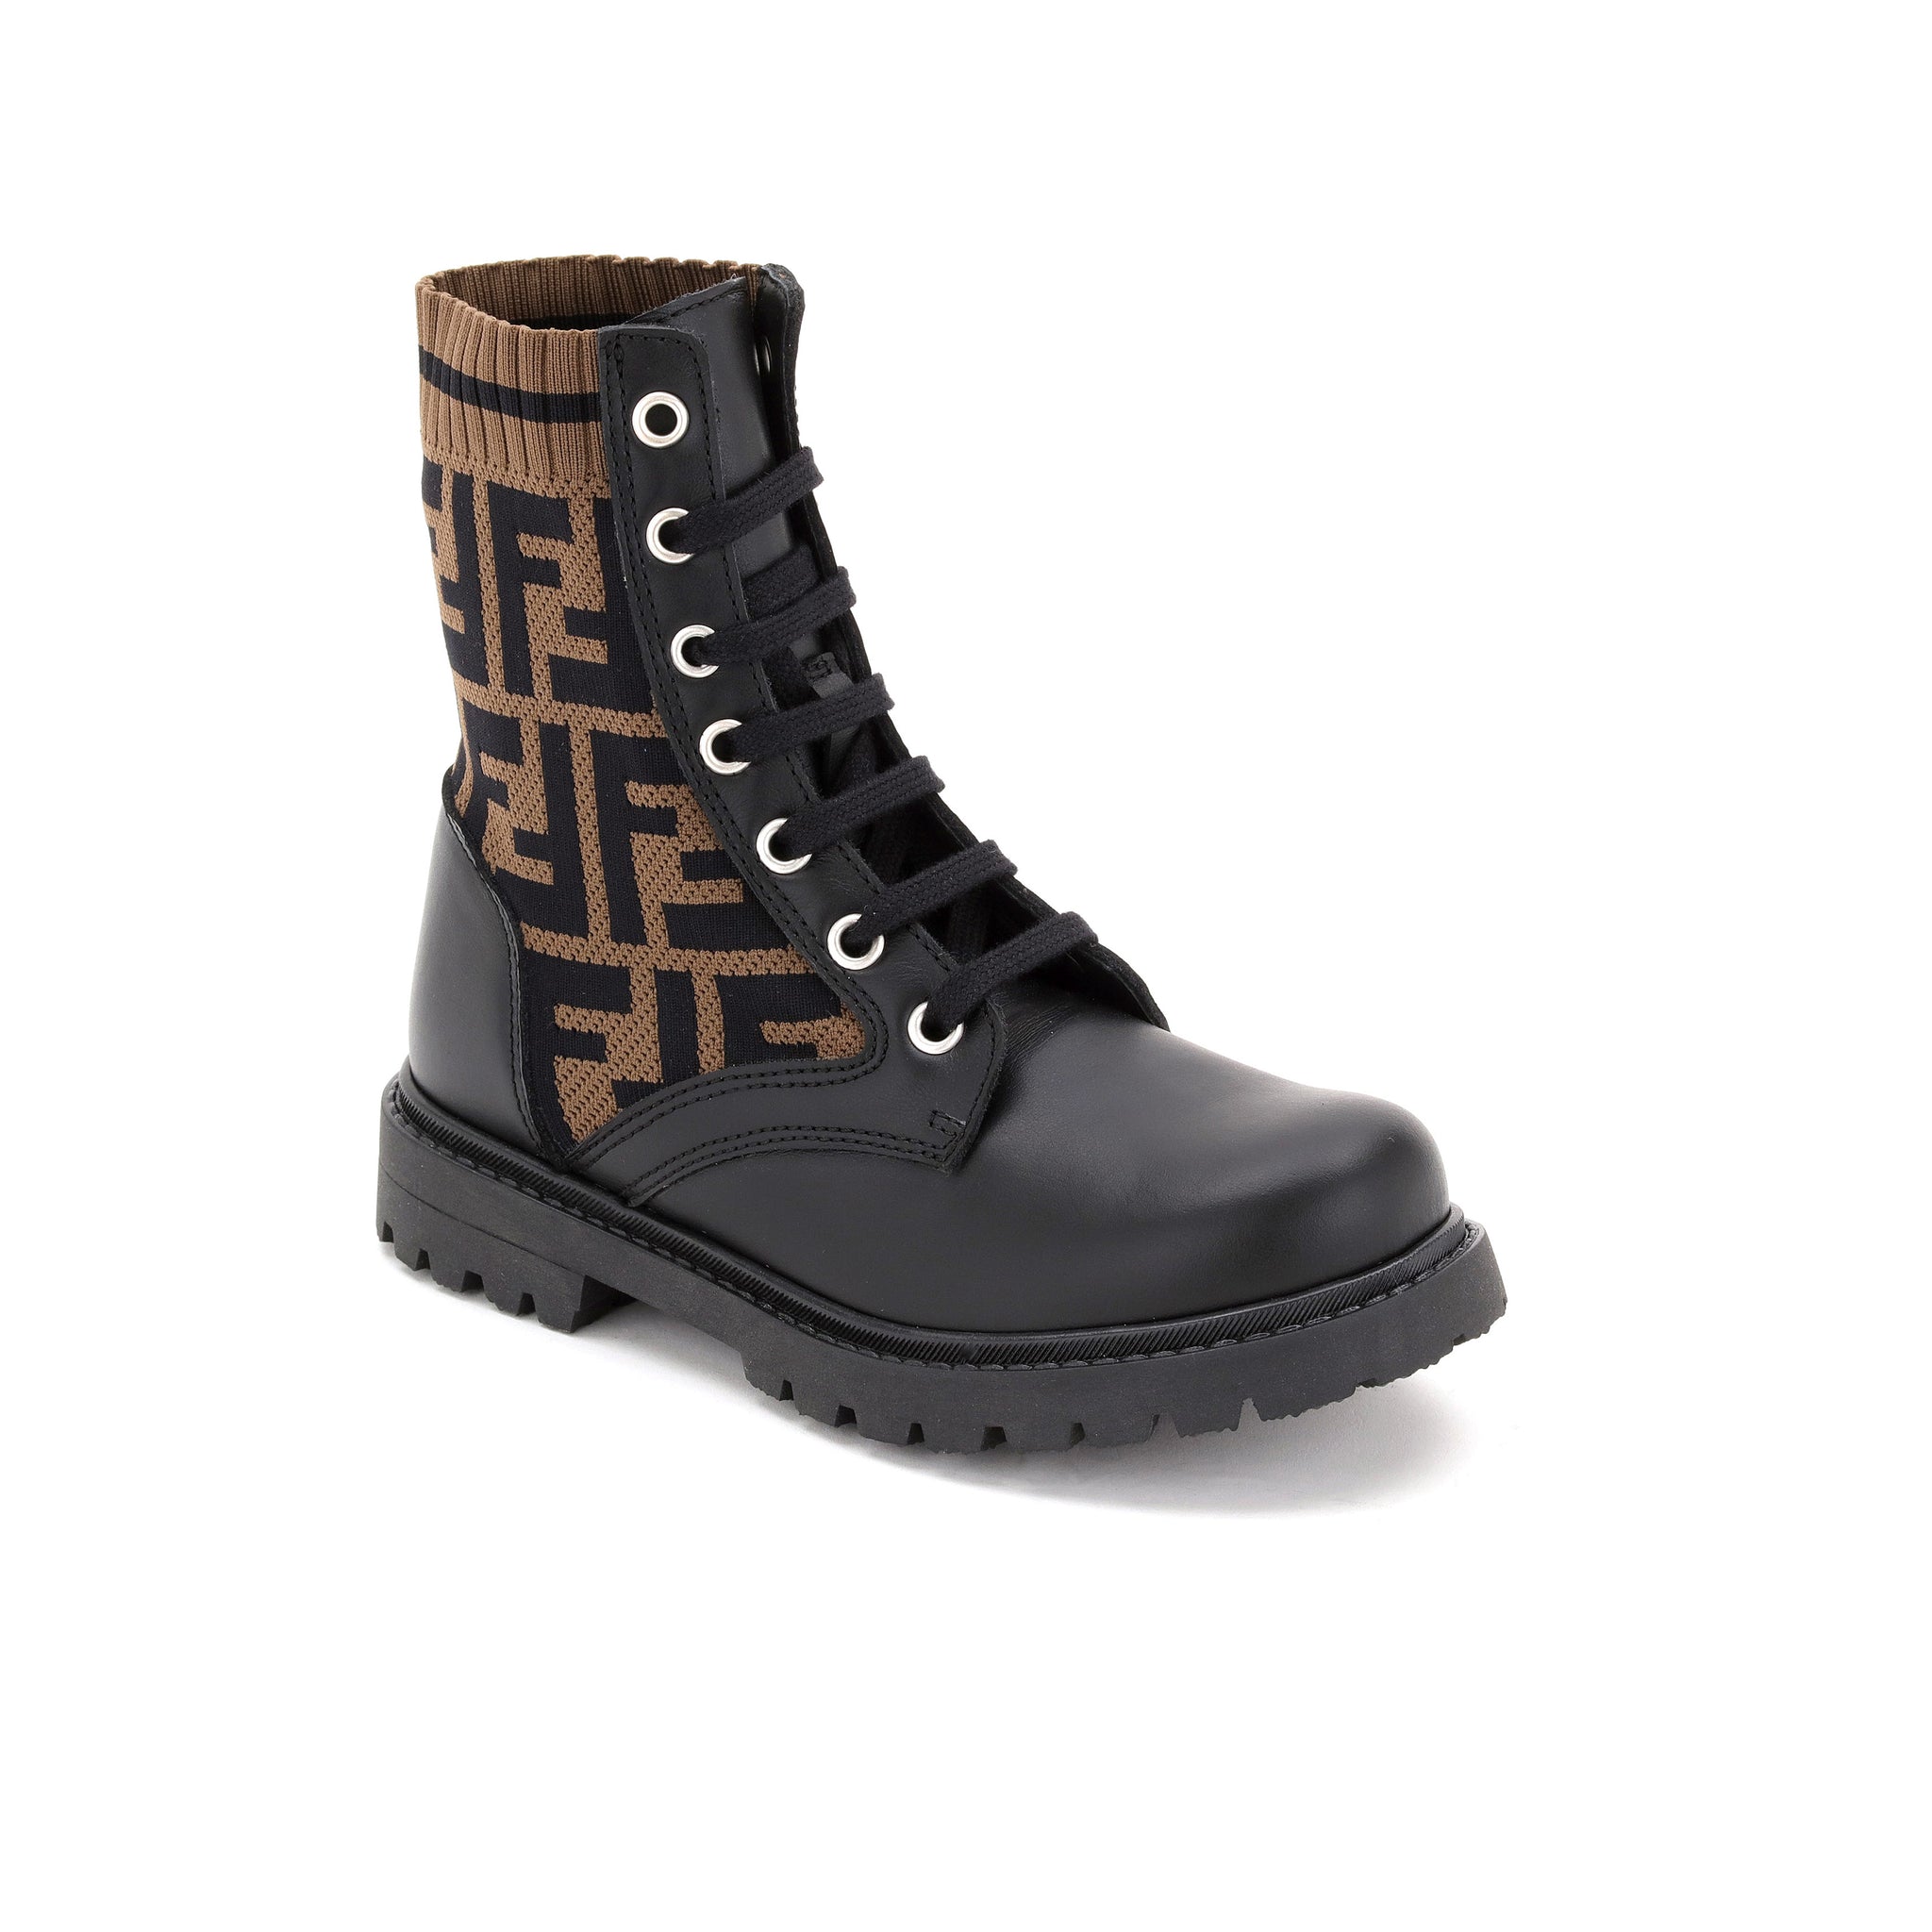 BOOTS W FF LOGO ON SOCK, brown